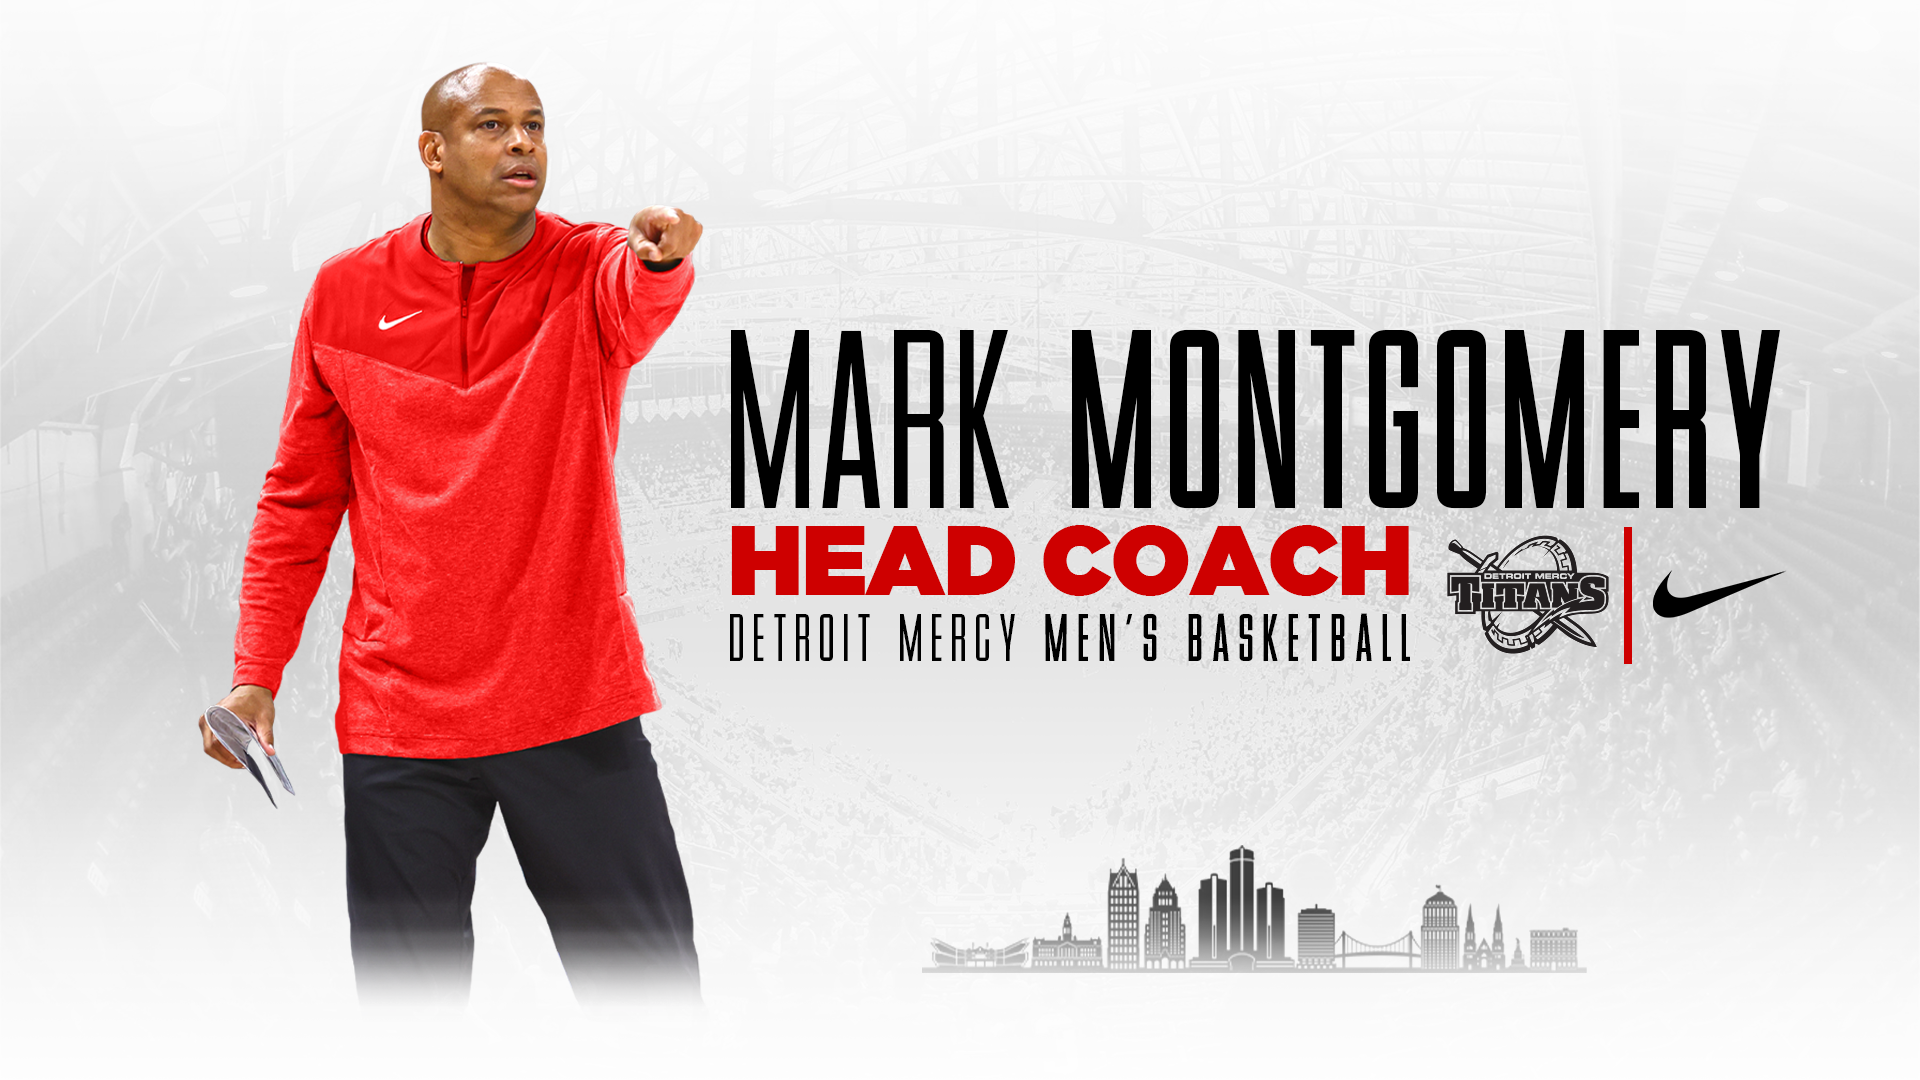 A graphic featuring a photo of Mark Montgomery, with text reading Mark Montgomery, Head Coach, ɫۺϾþ Mercy Men's Basketball and featuring logos for ɫۺϾþ Mercy Titans and Nike.